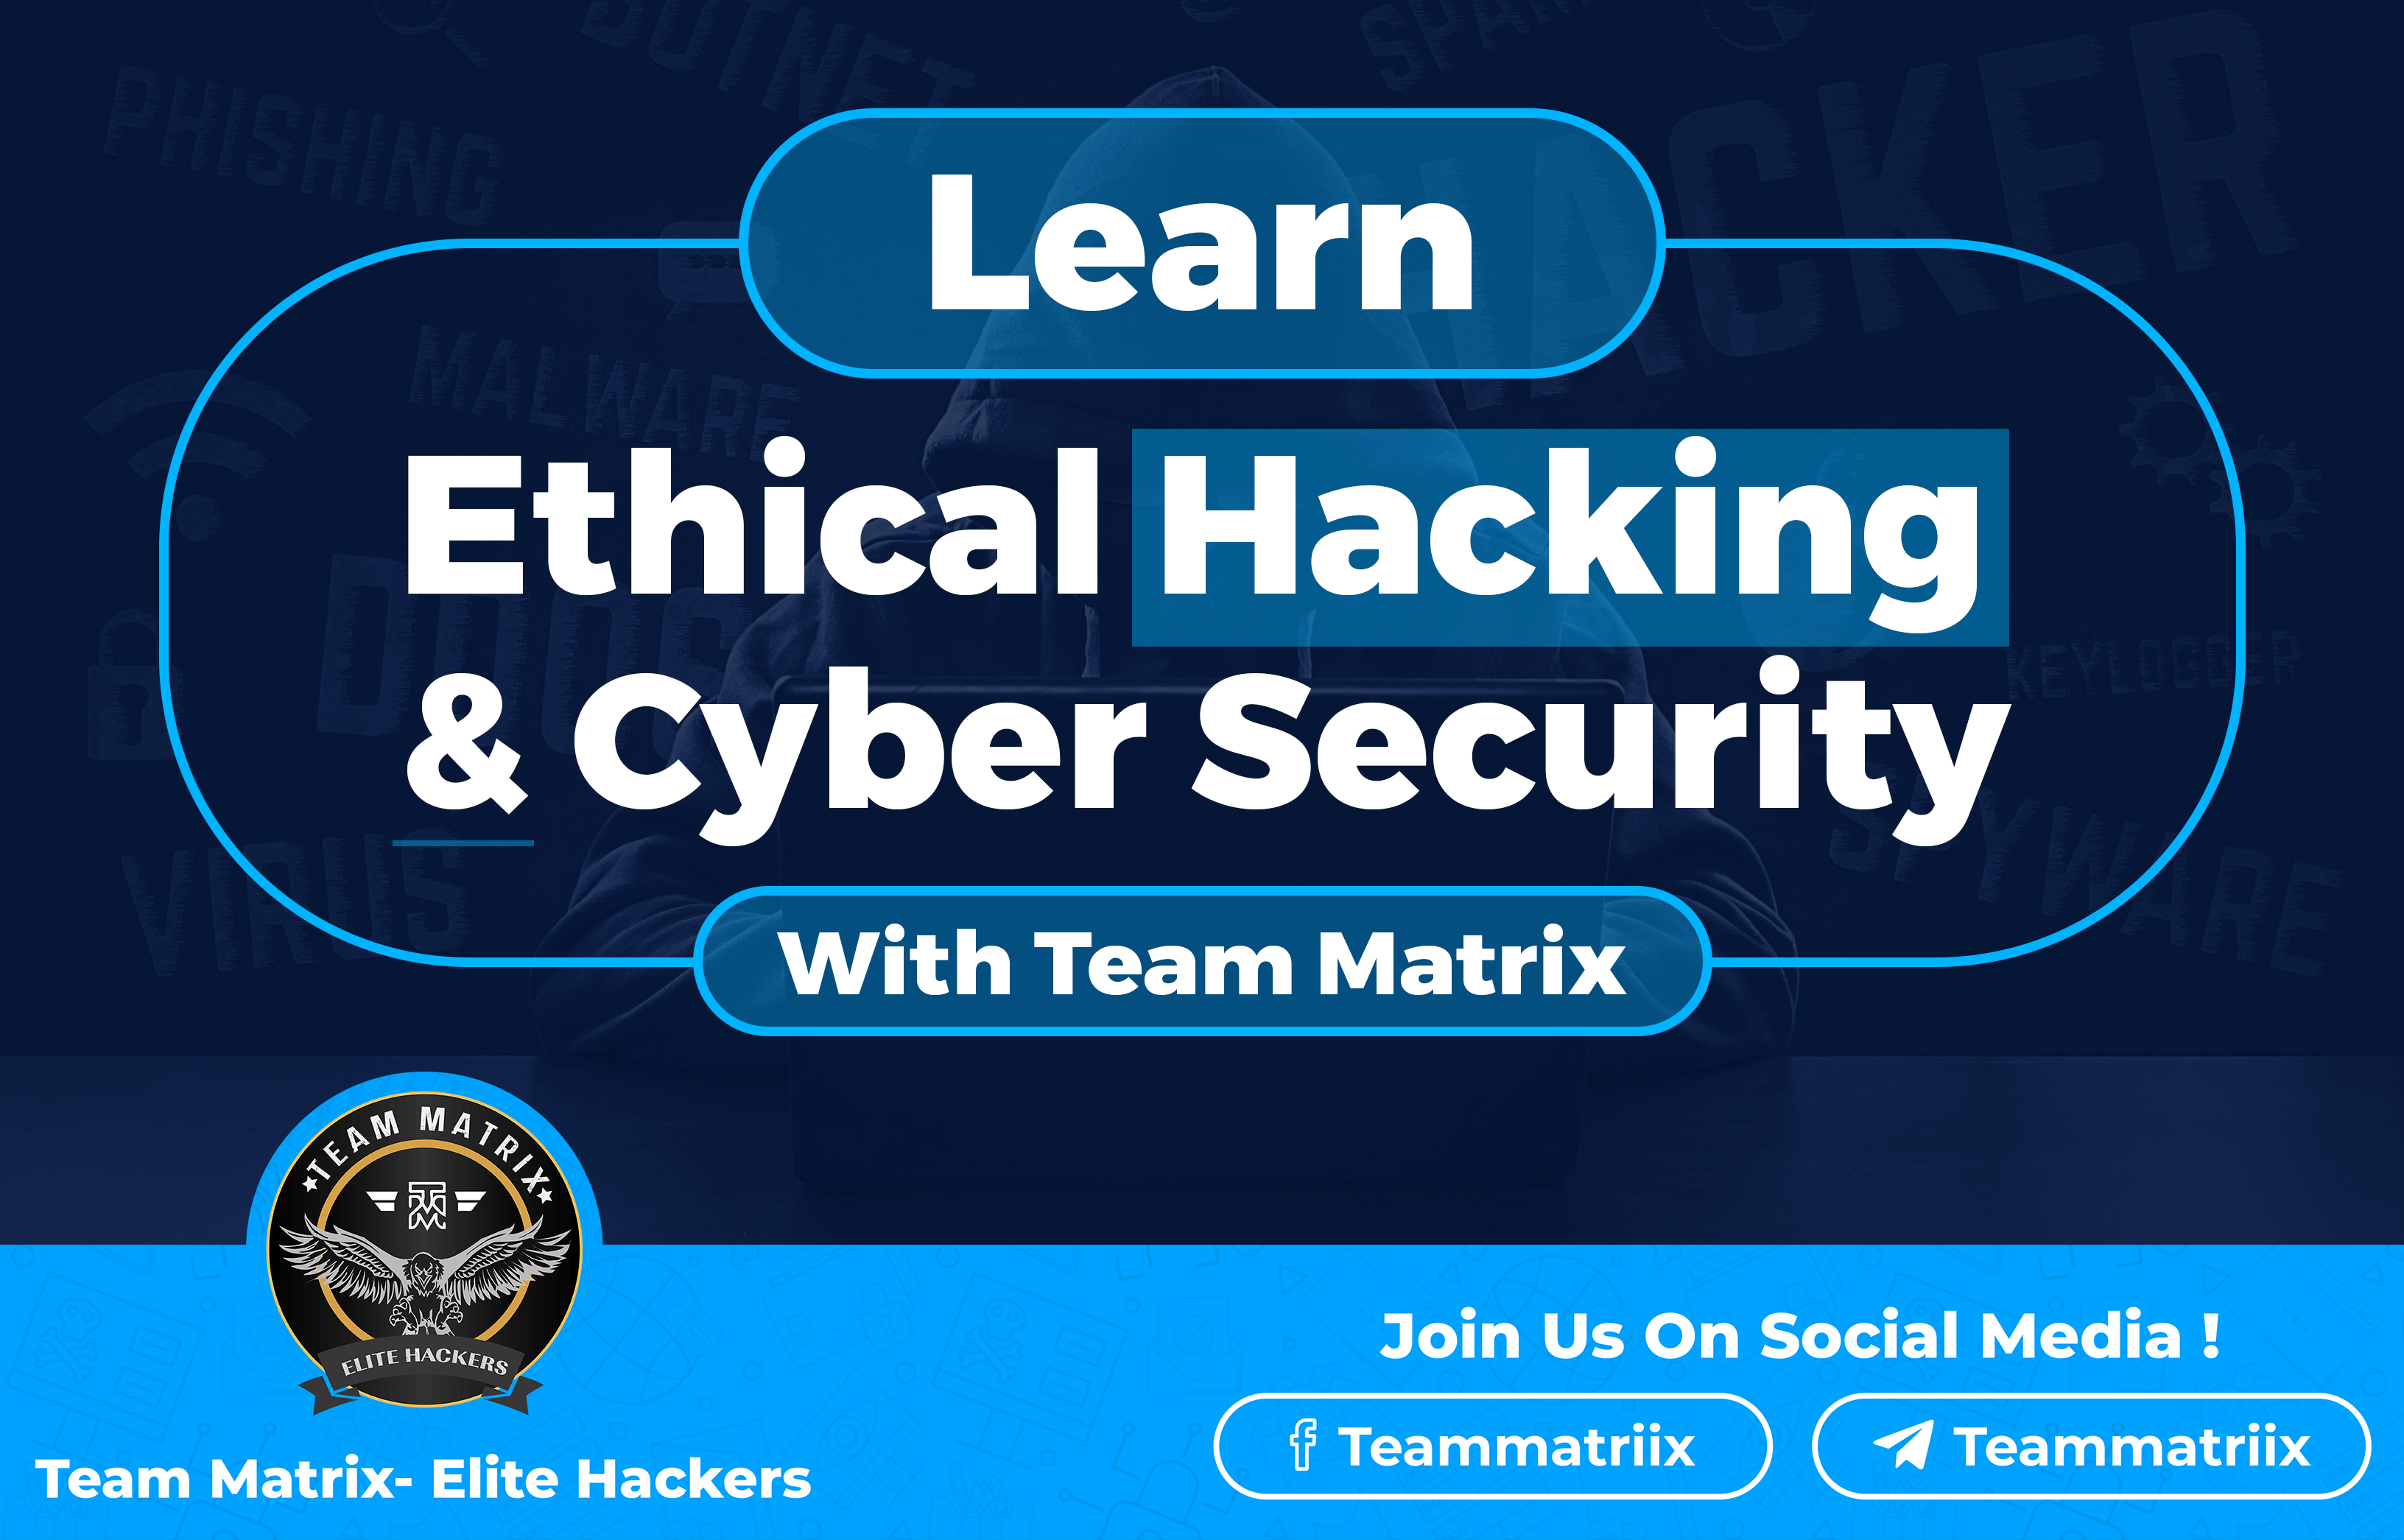 Learn Ethical Hacking & Cybersecurity